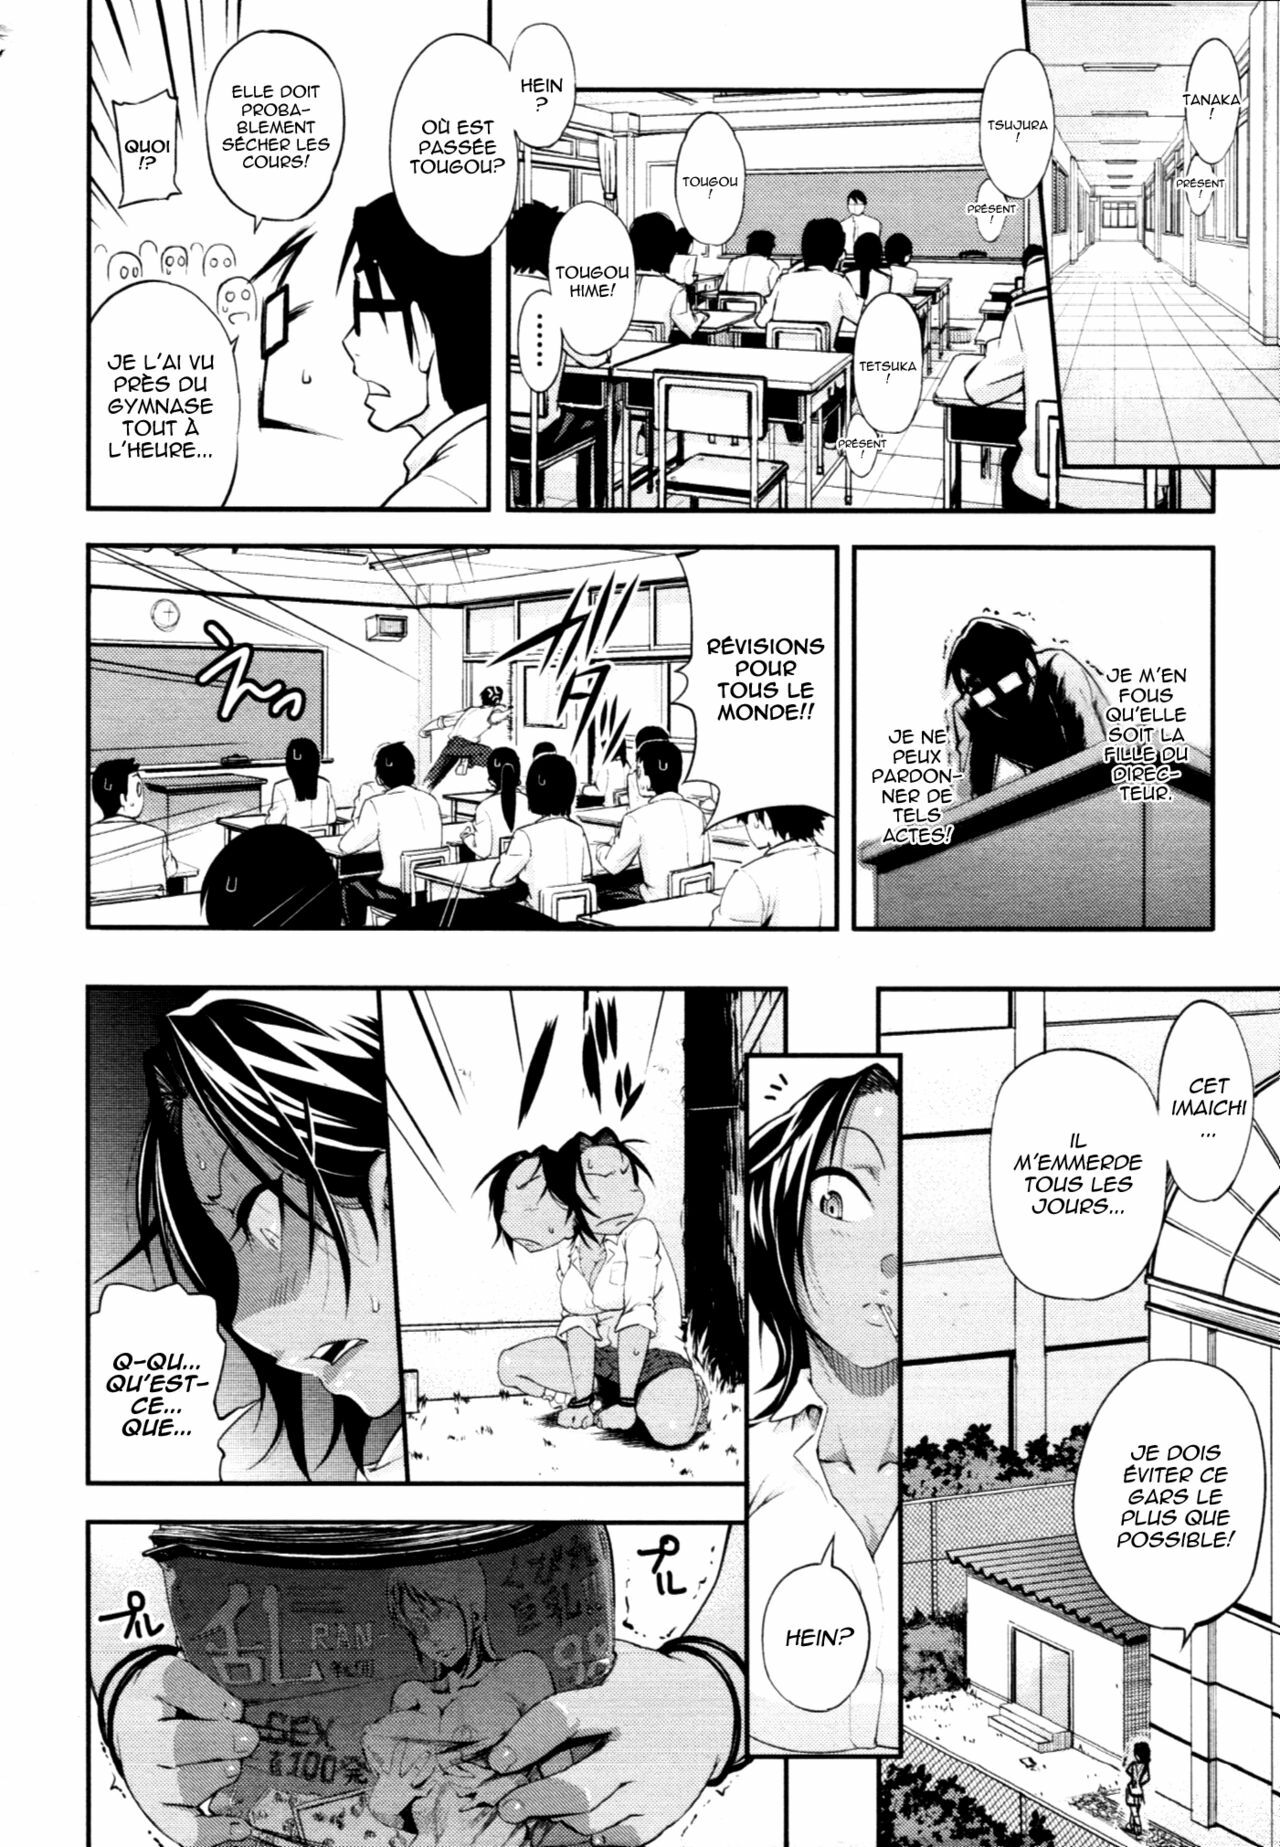 [Jun] Junketsu Before After | Purity Before After (COMIC Tenma 2010-07) [French] [Cejix & Kerios] page 2 full